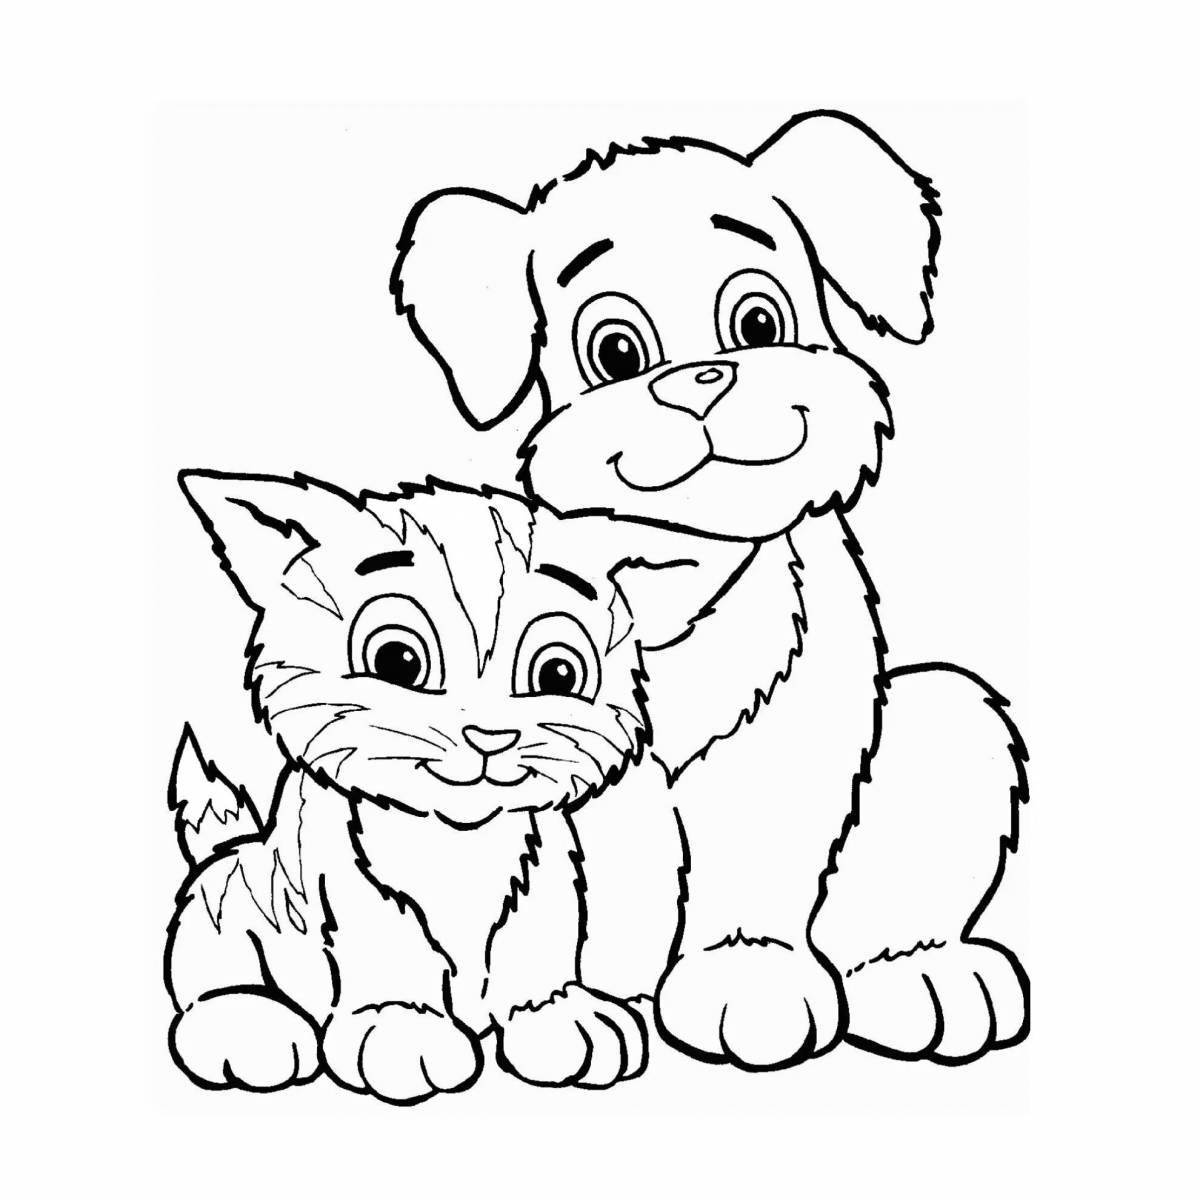 Coloring page serene cat and dog together